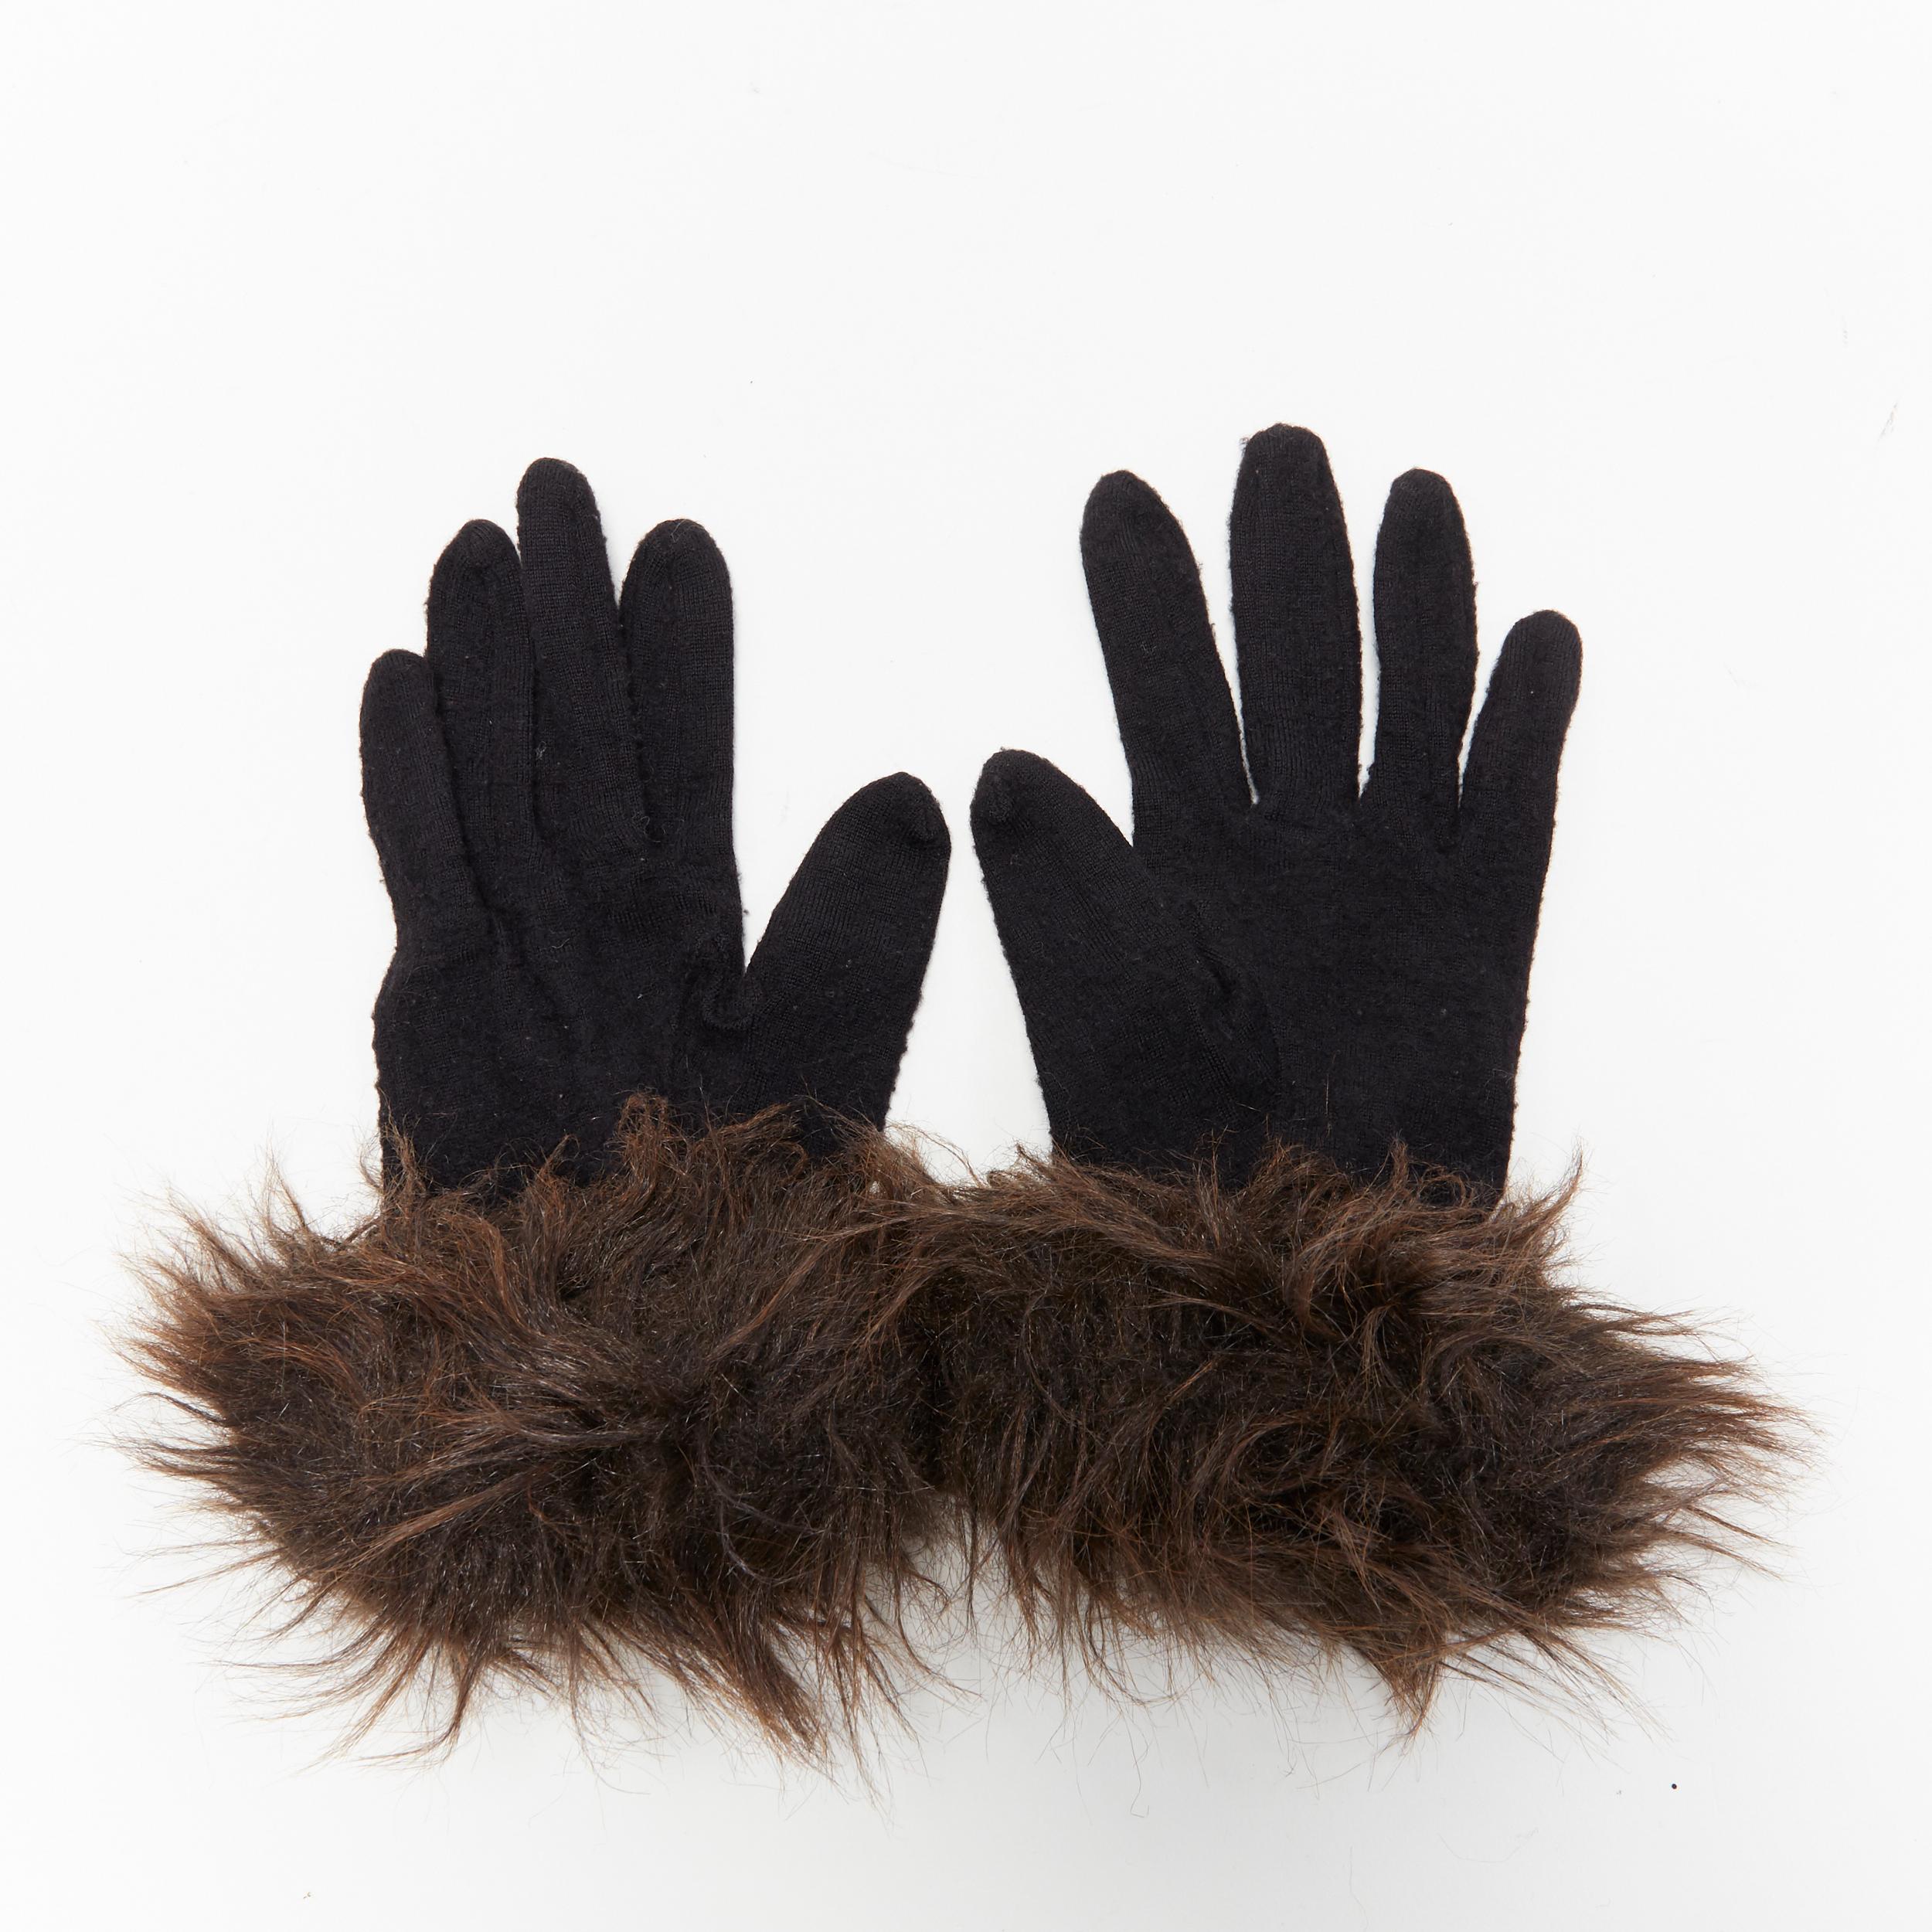 YOHJI YAMAMOTO black washed wool brown faux fur trimmed winter gloves
Brand: Yohji Yamamoto
Designer: v
Model Name / Style: Faux fur gloves
Material: Wool
Color: Black, brown
Pattern: Solid
Extra Detail: Faux fur trimming.
Made in: Japan

CONDITION: